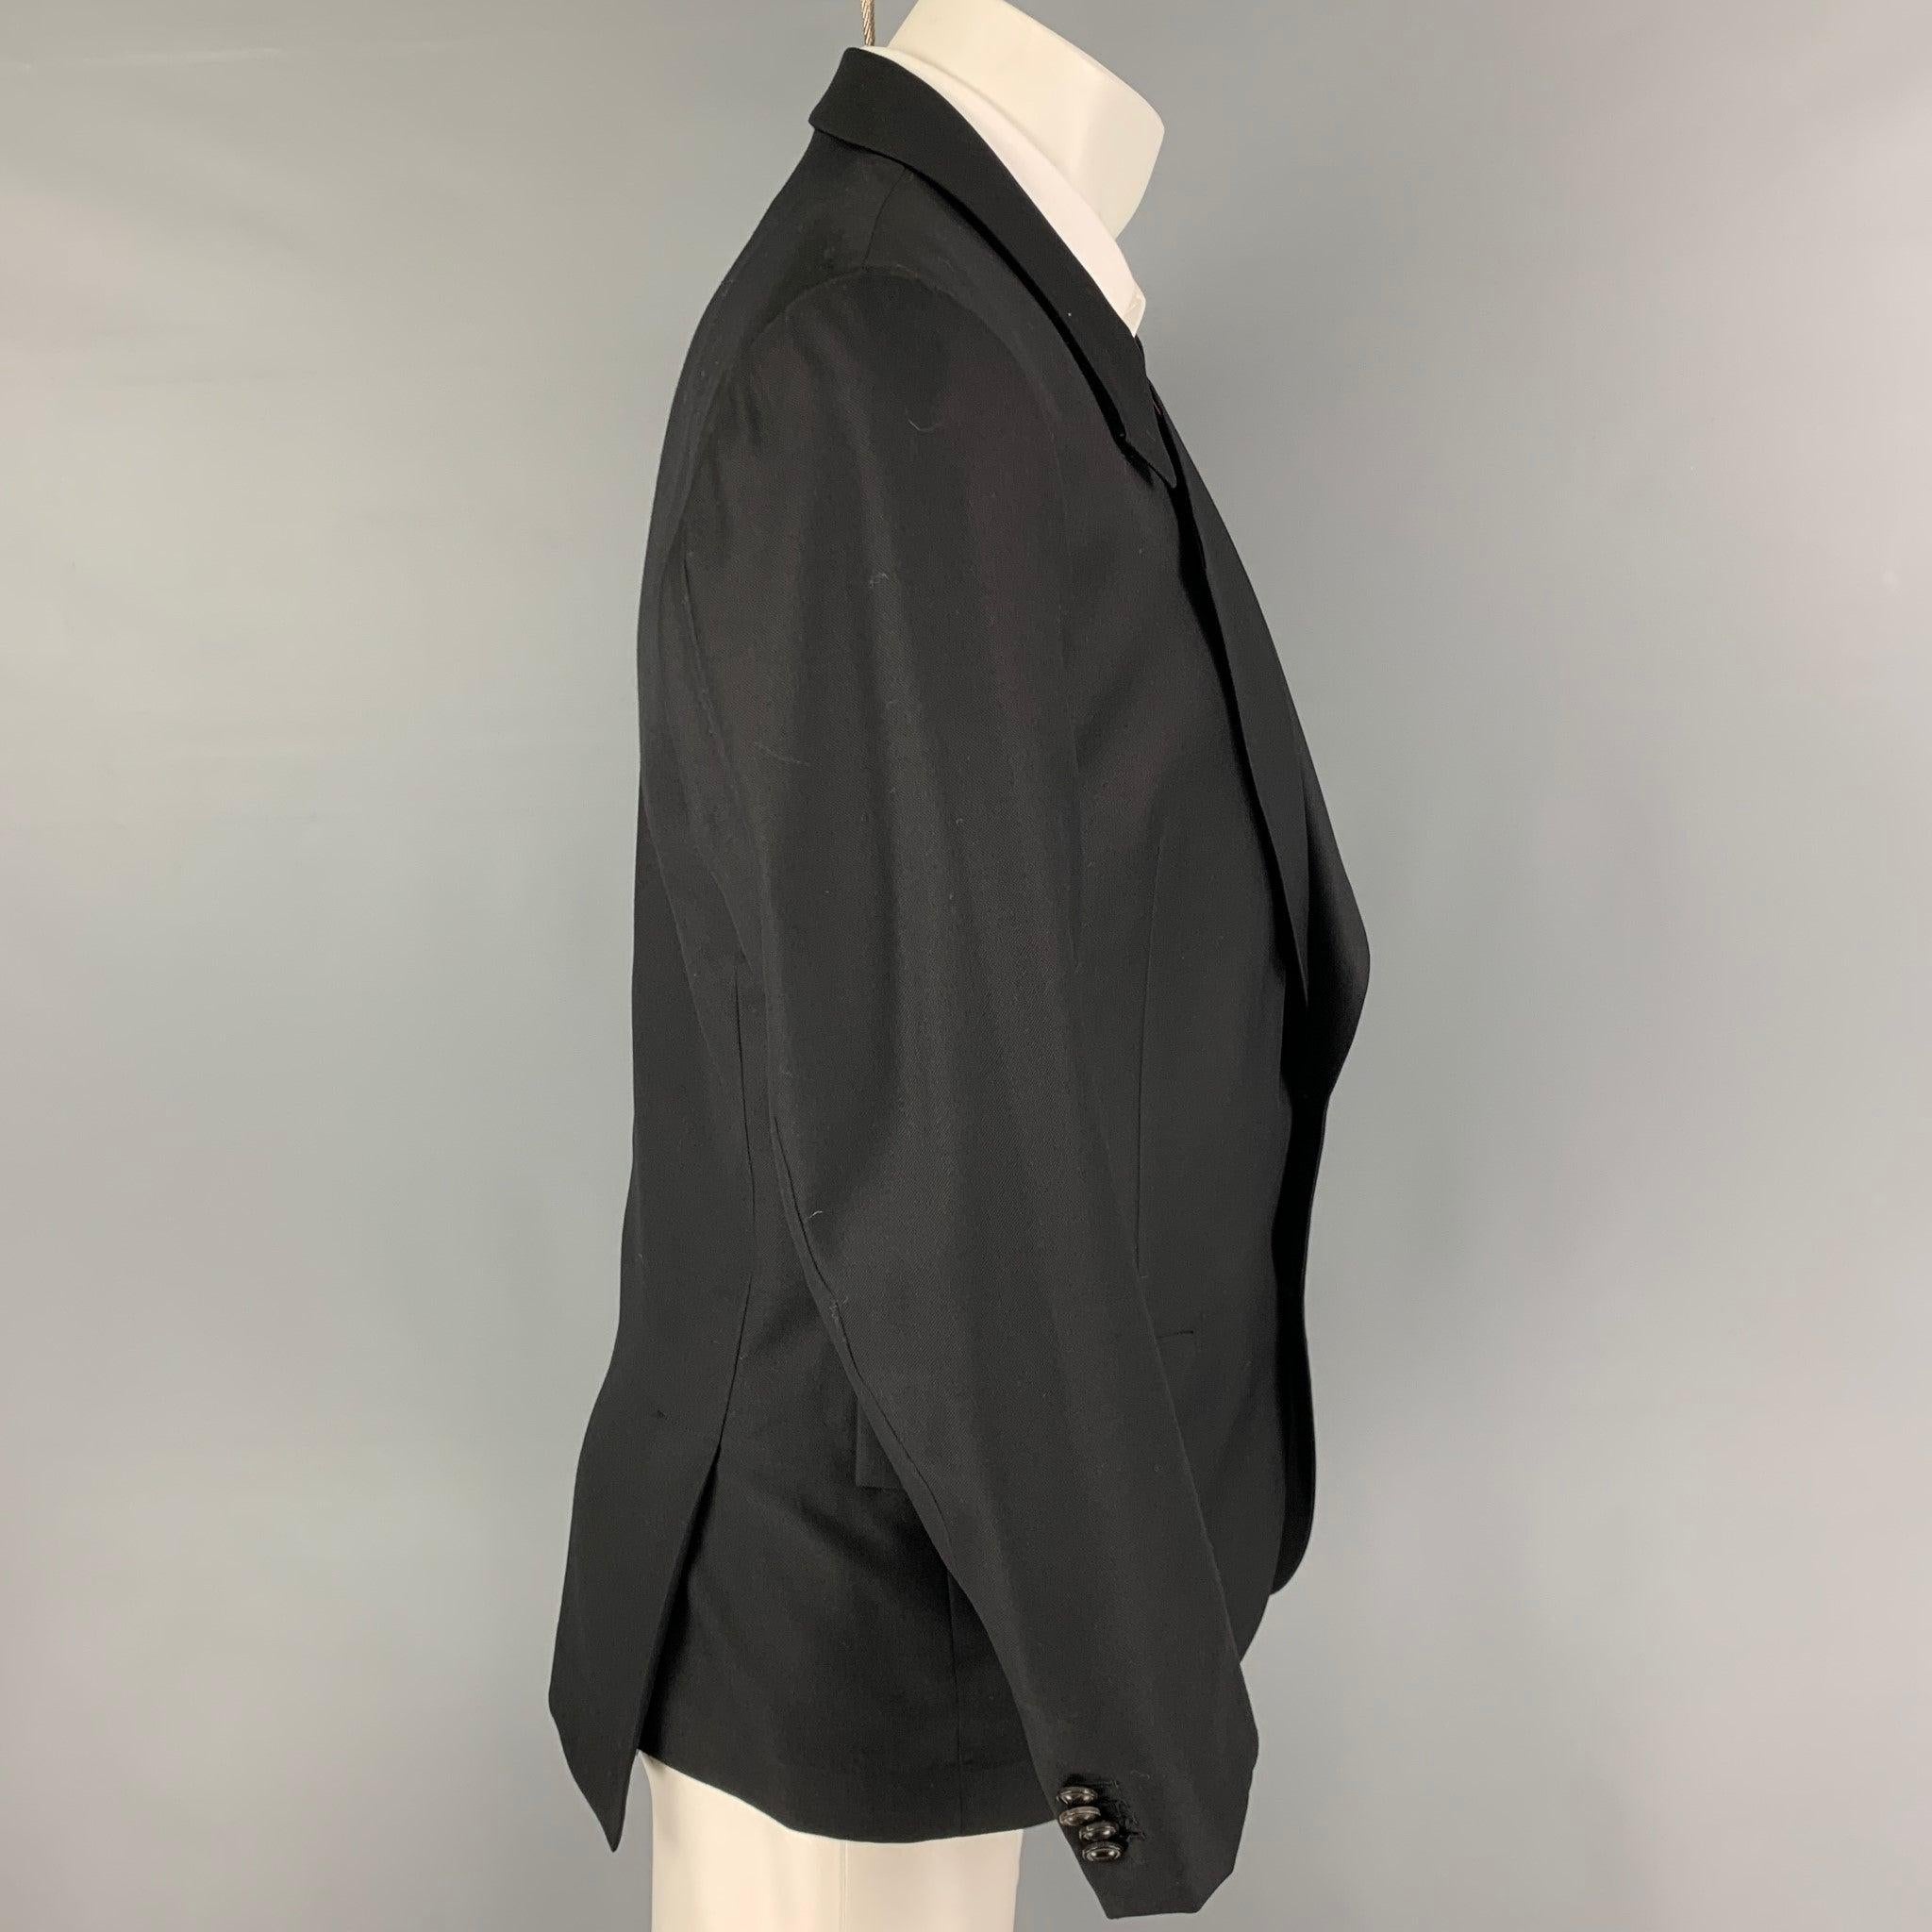 PAUL SMITH sport coat comes in a black wool / silk with a full liner featuring a notch lapel, flap pockets, double back vent, and a double button closure. Made in Japan.
Excellent
Pre-Owned Condition. 

Marked:   40 

Measurements: 
 
Shoulder: 17.5